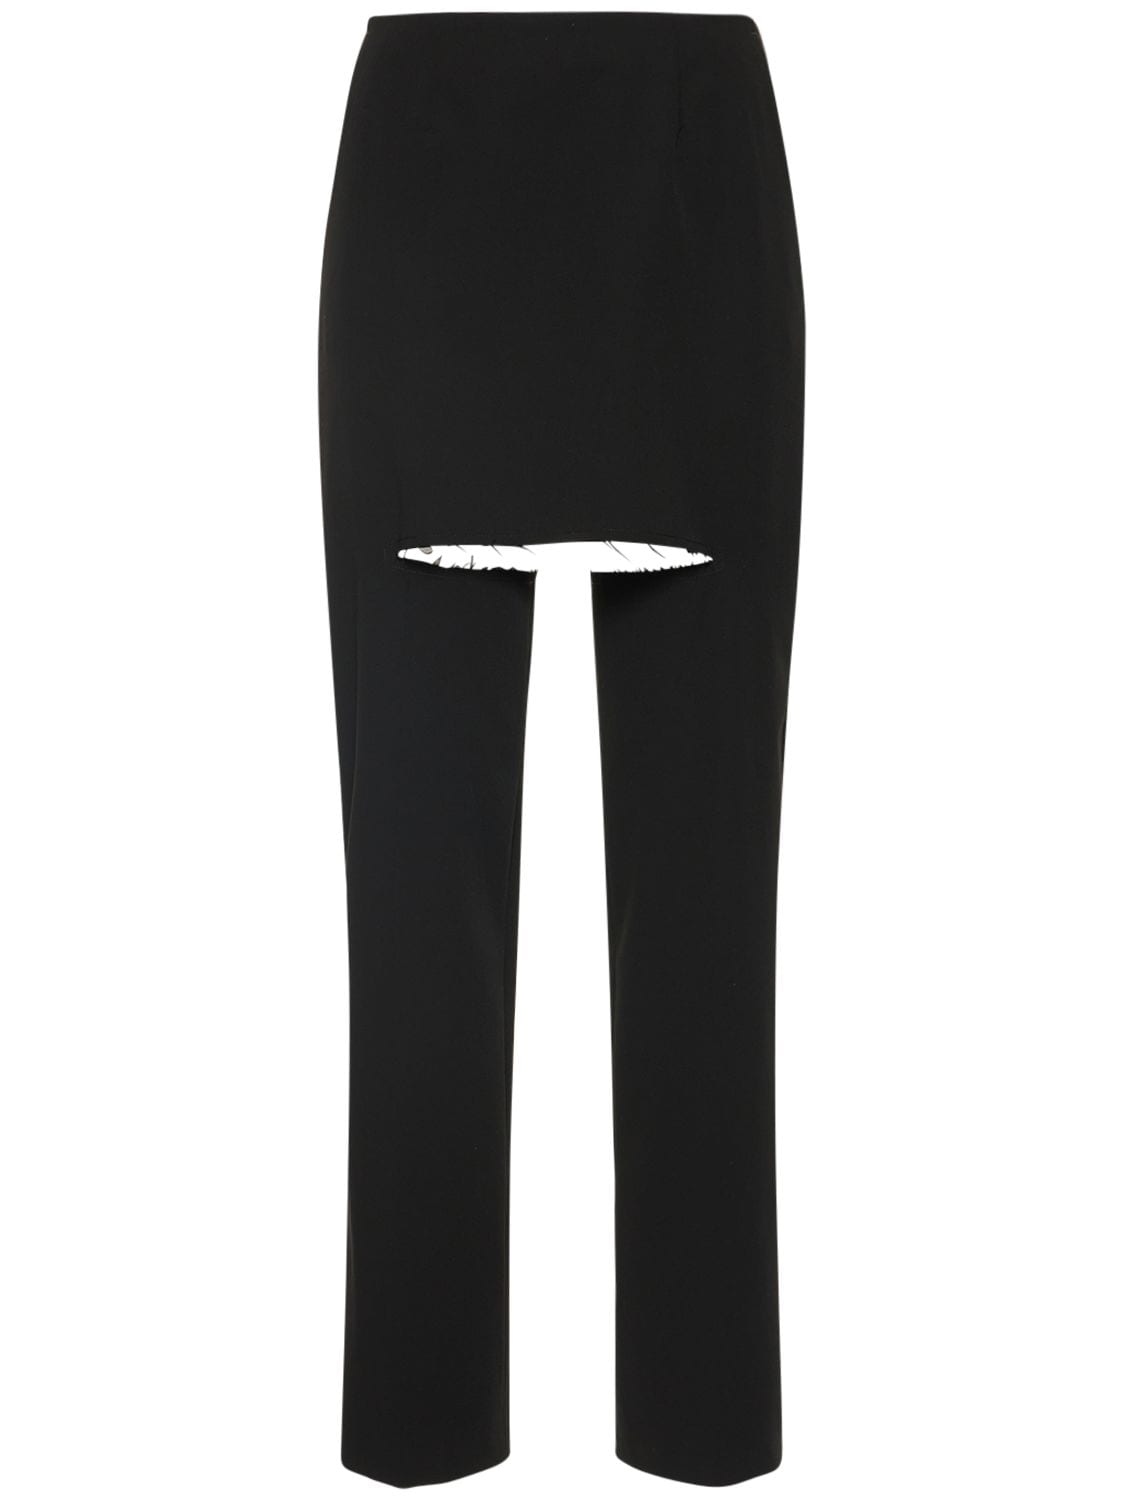 Techno Tailored Stretch Pants